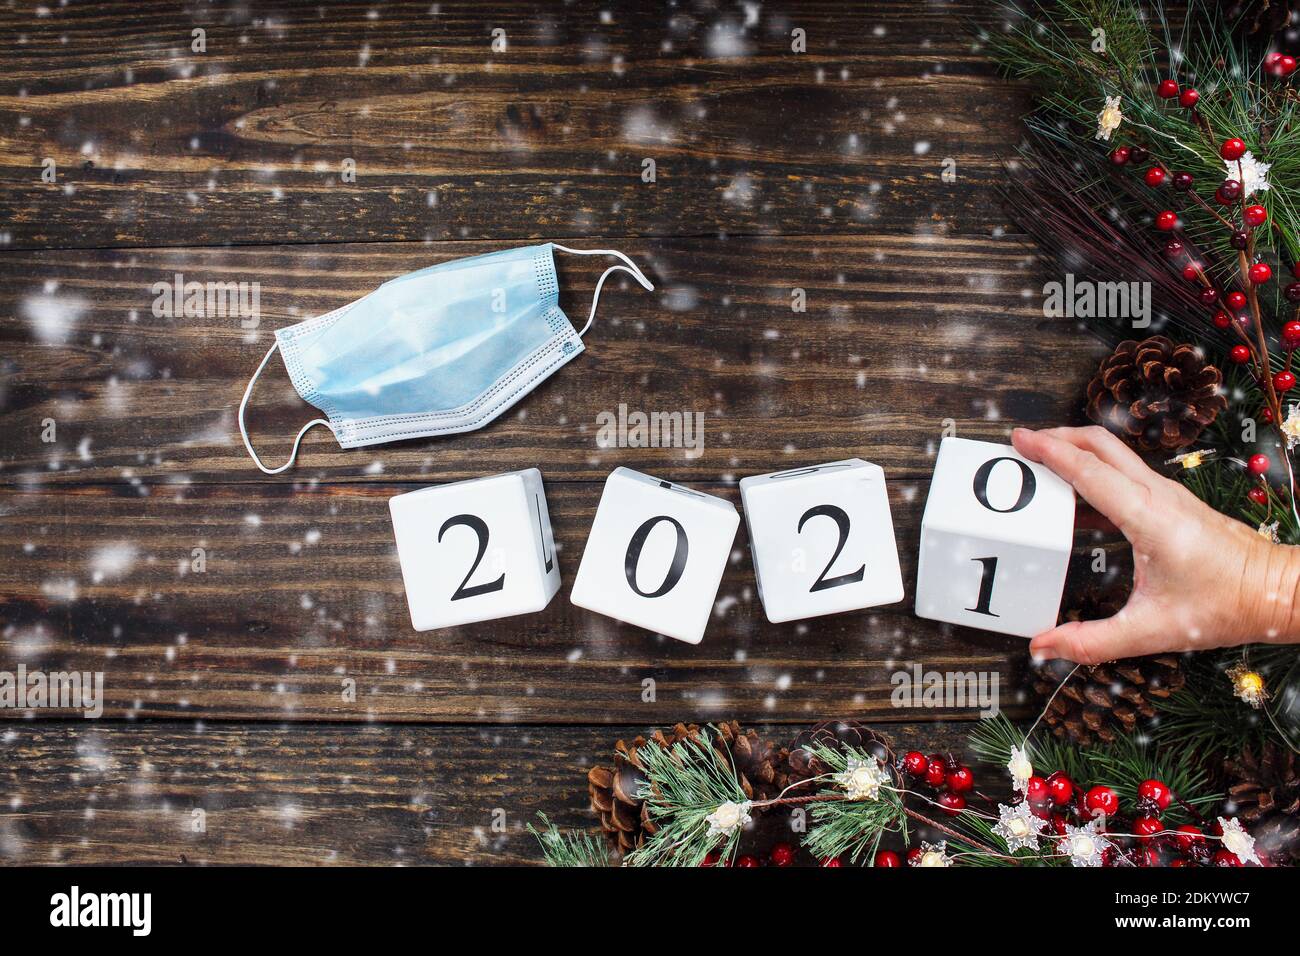 Woman's hand flipping New Year's 2020 wood calendar blocks to 2021. Medical mask, Christmas tree lights, decorations, pine branches, red winter berrie Stock Photo